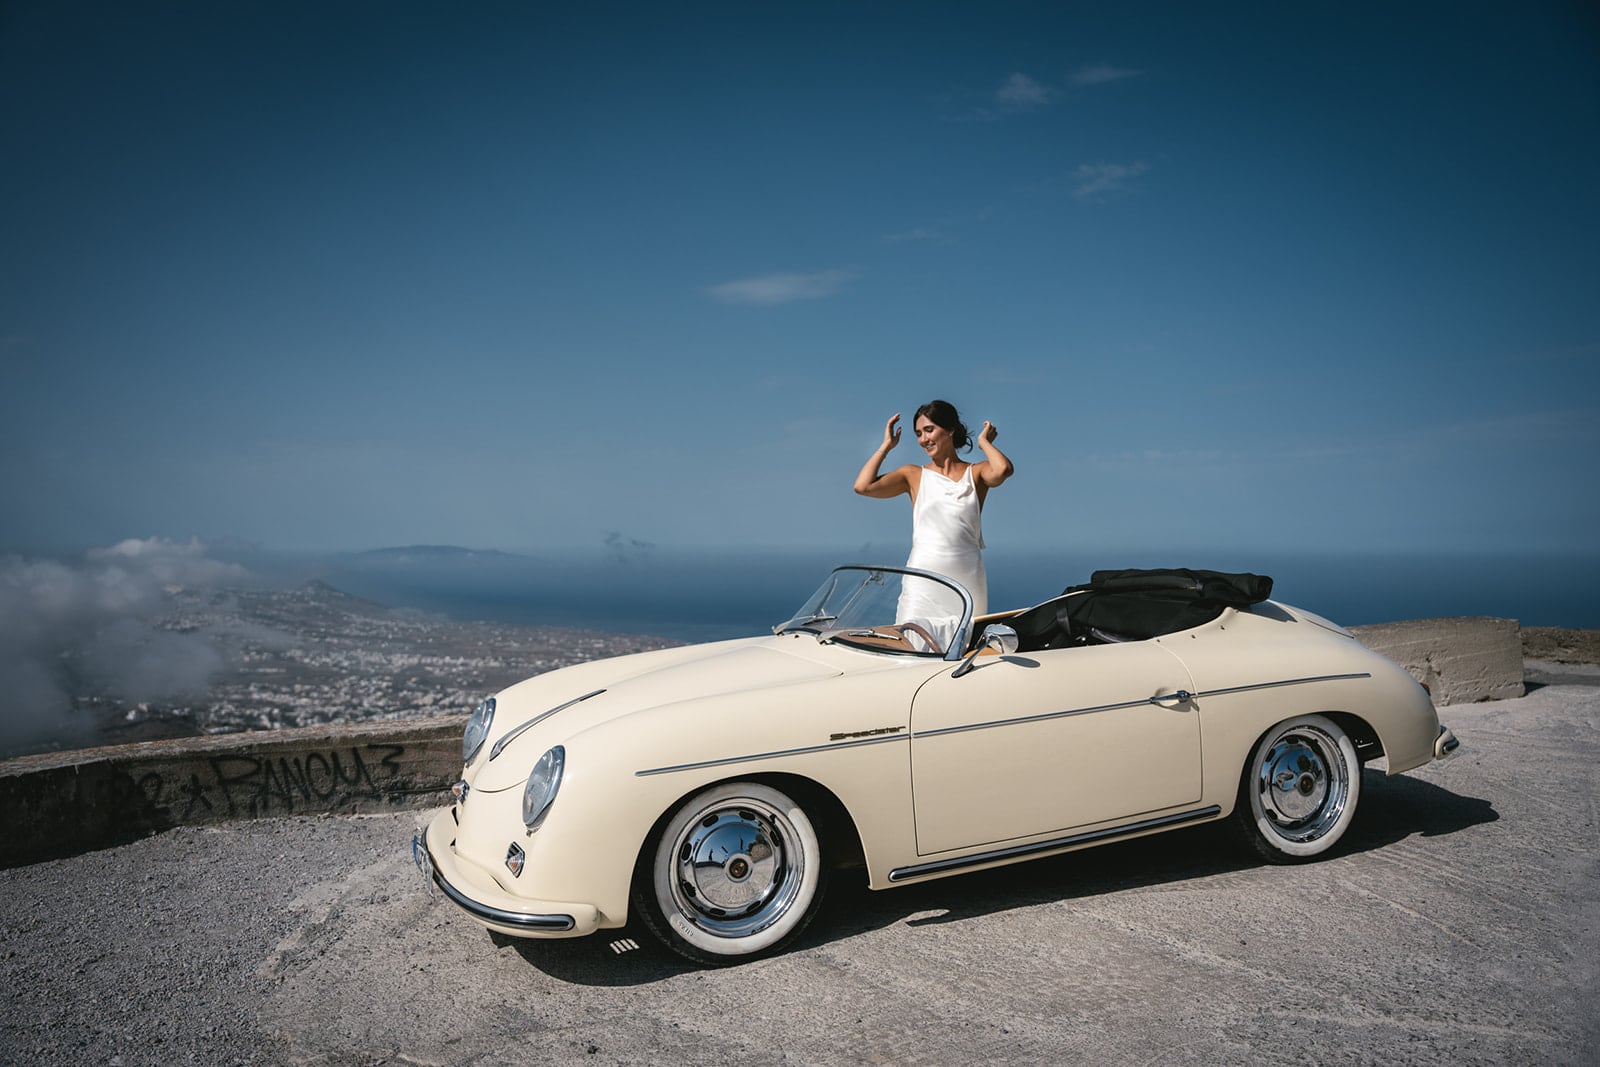 Elopement elegance: A vintage car, the endless sea, and two hearts in harmony